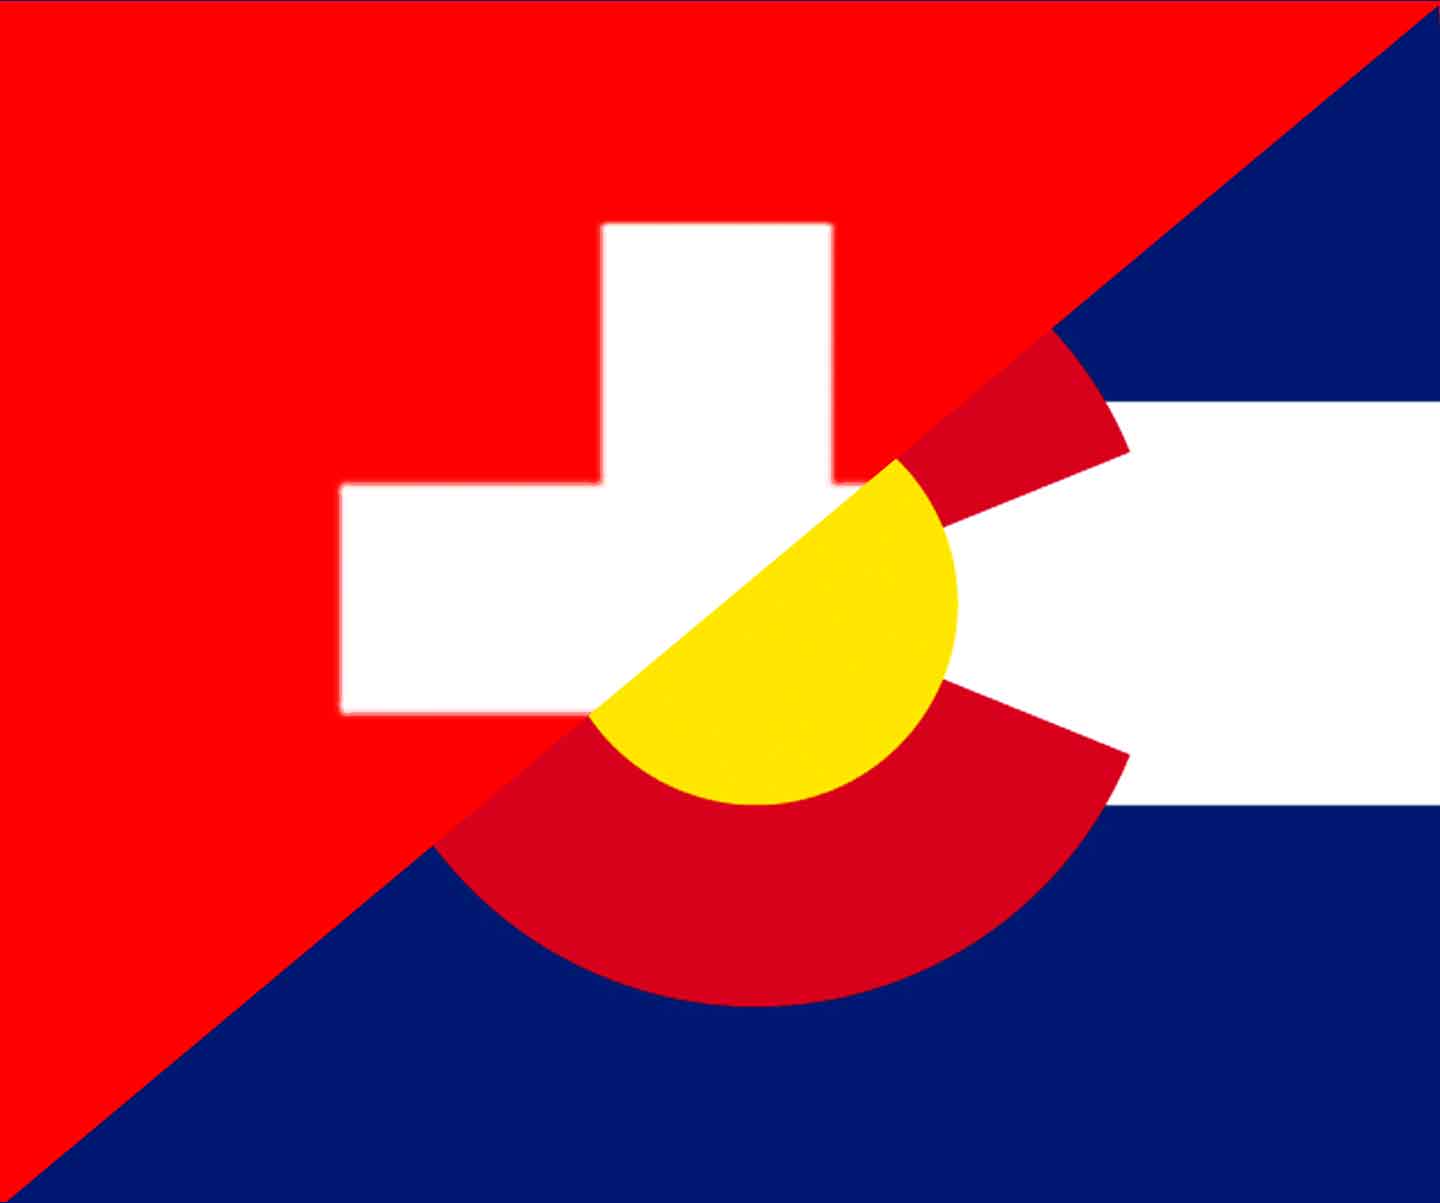 Swiss and Colorado state flags